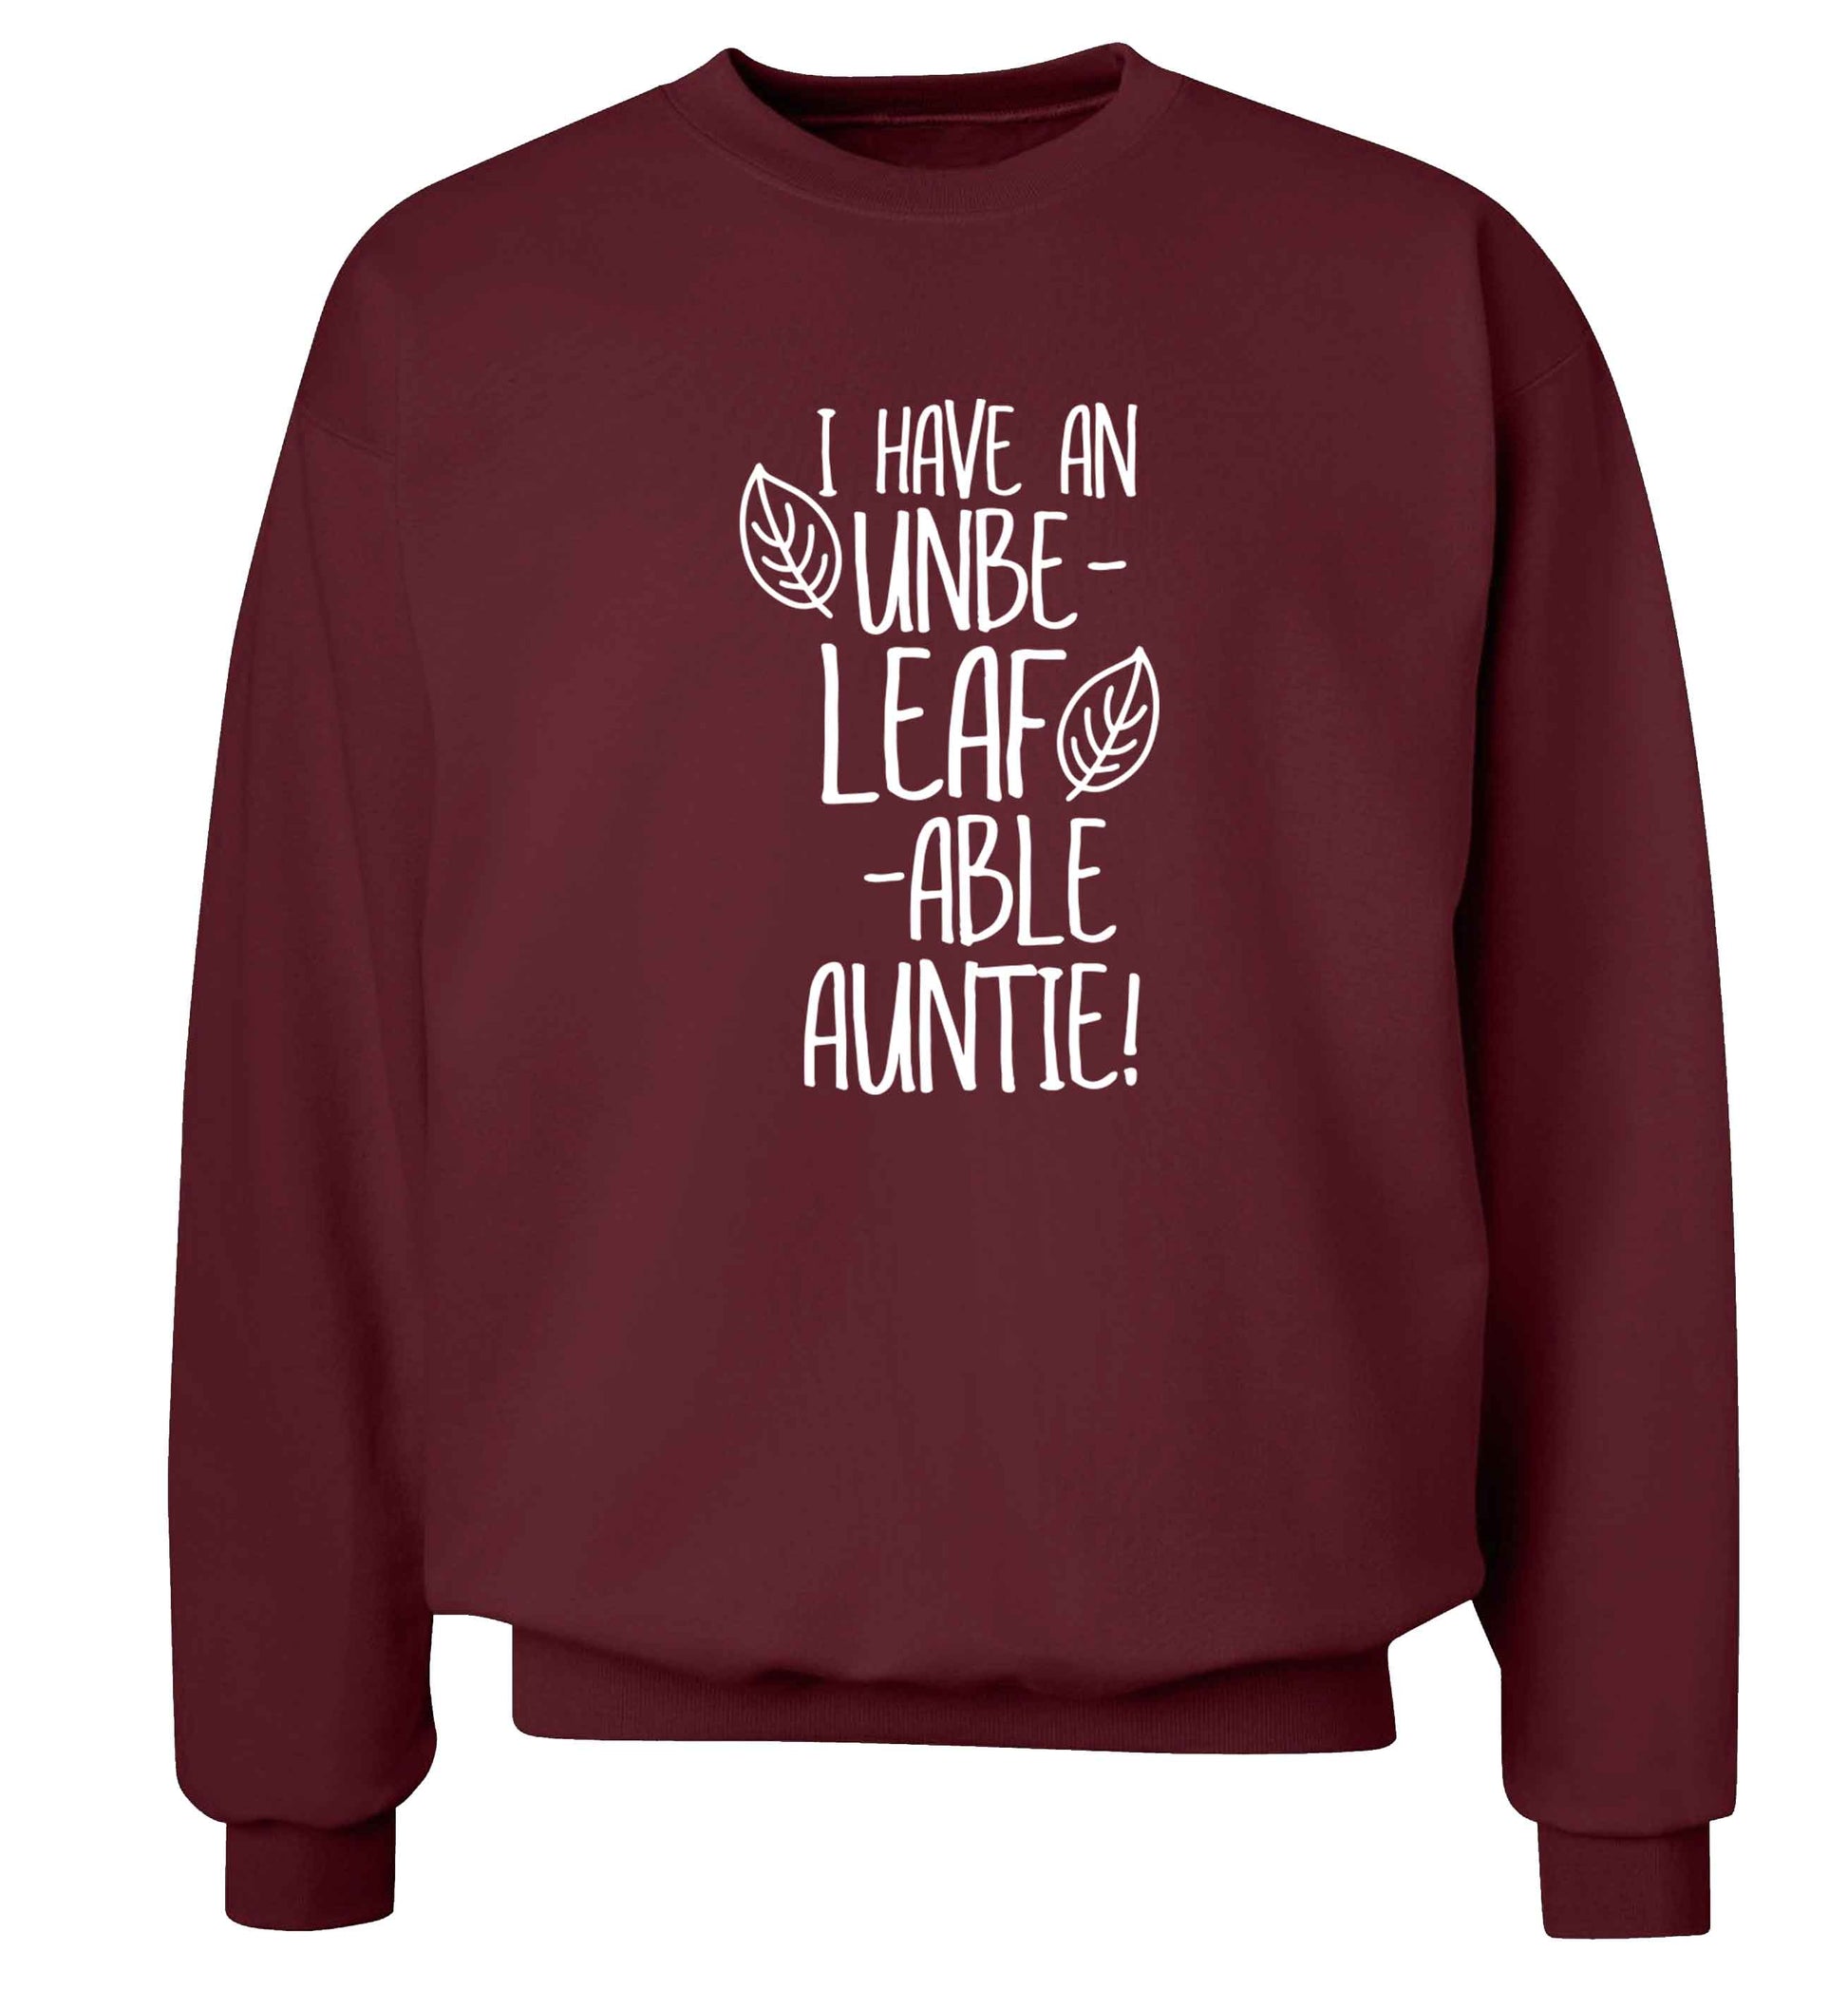 I have an unbe-leaf-able auntie Adult's unisex maroon Sweater 2XL